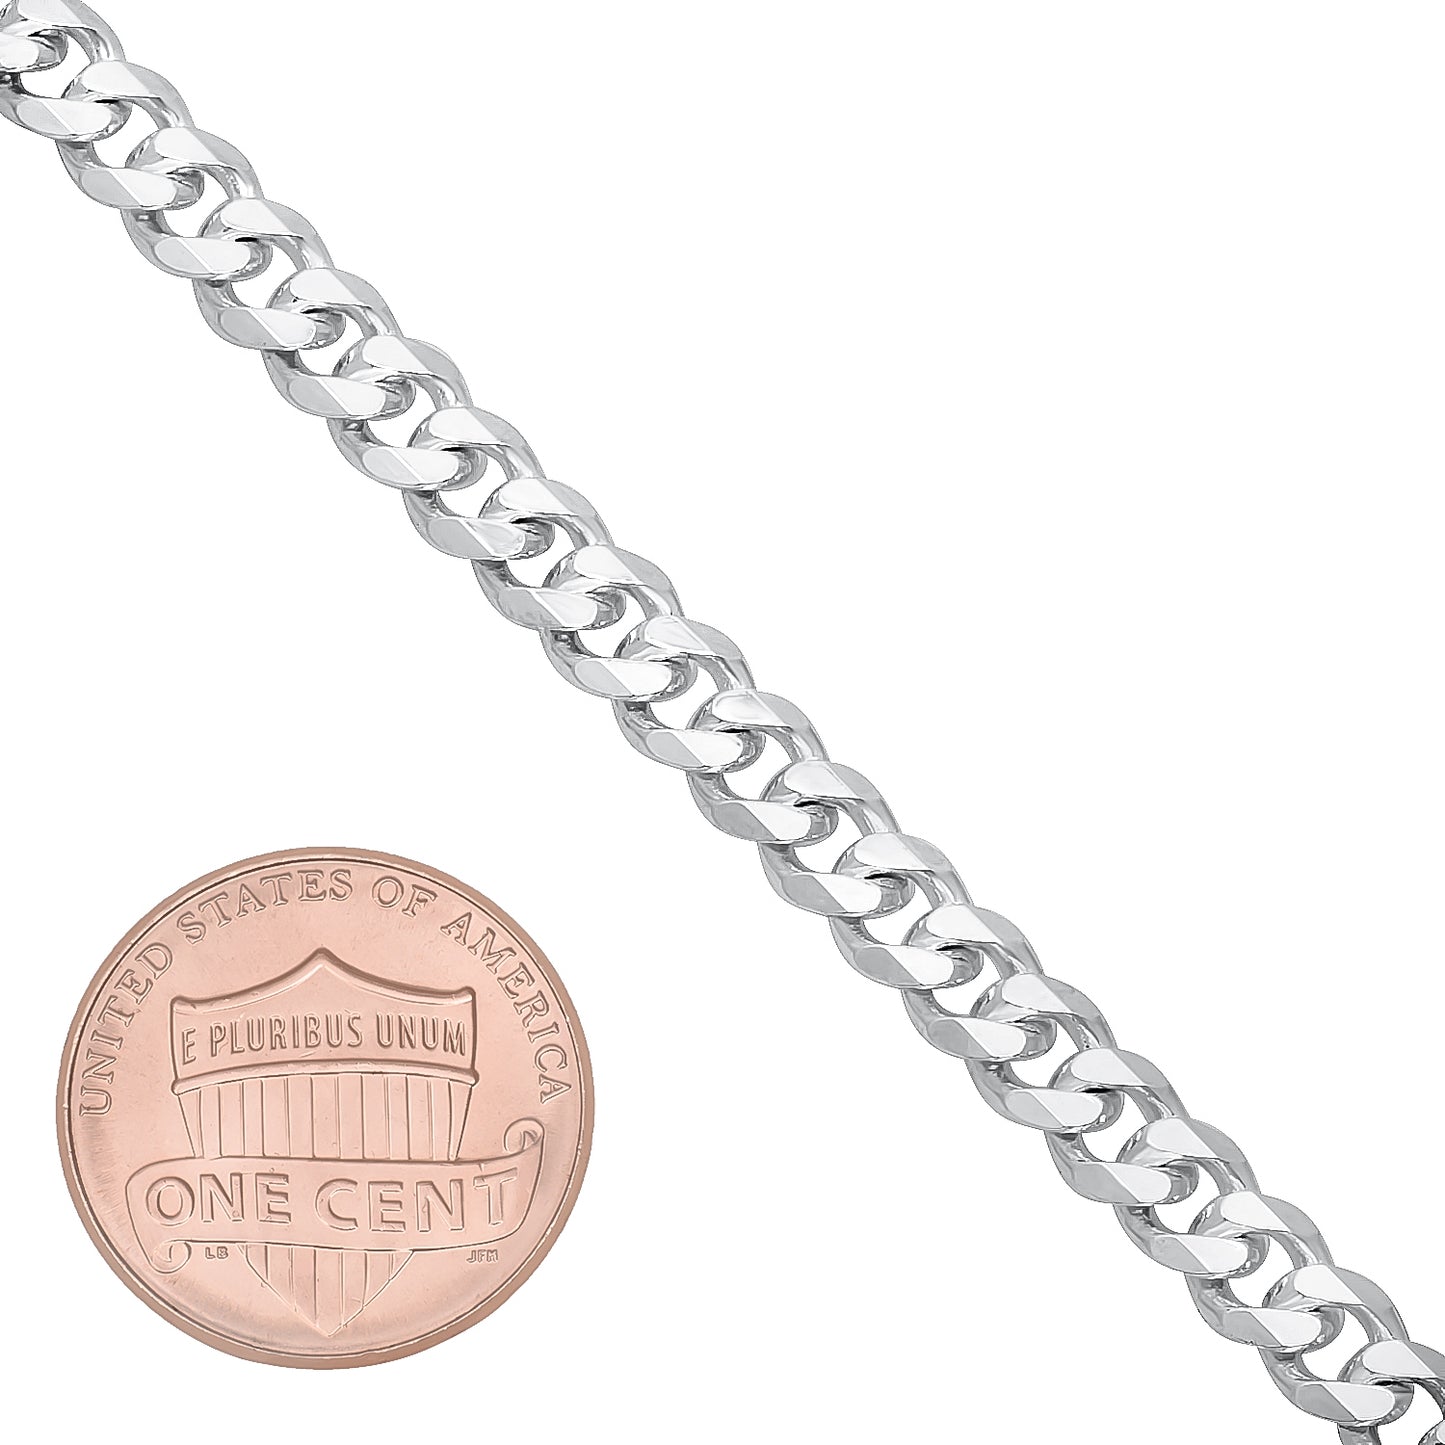 Men's 5mm Solid .925 Sterling Silver Beveled Curb Chain Necklace + Gift Box (SKU: NEC528-BX)